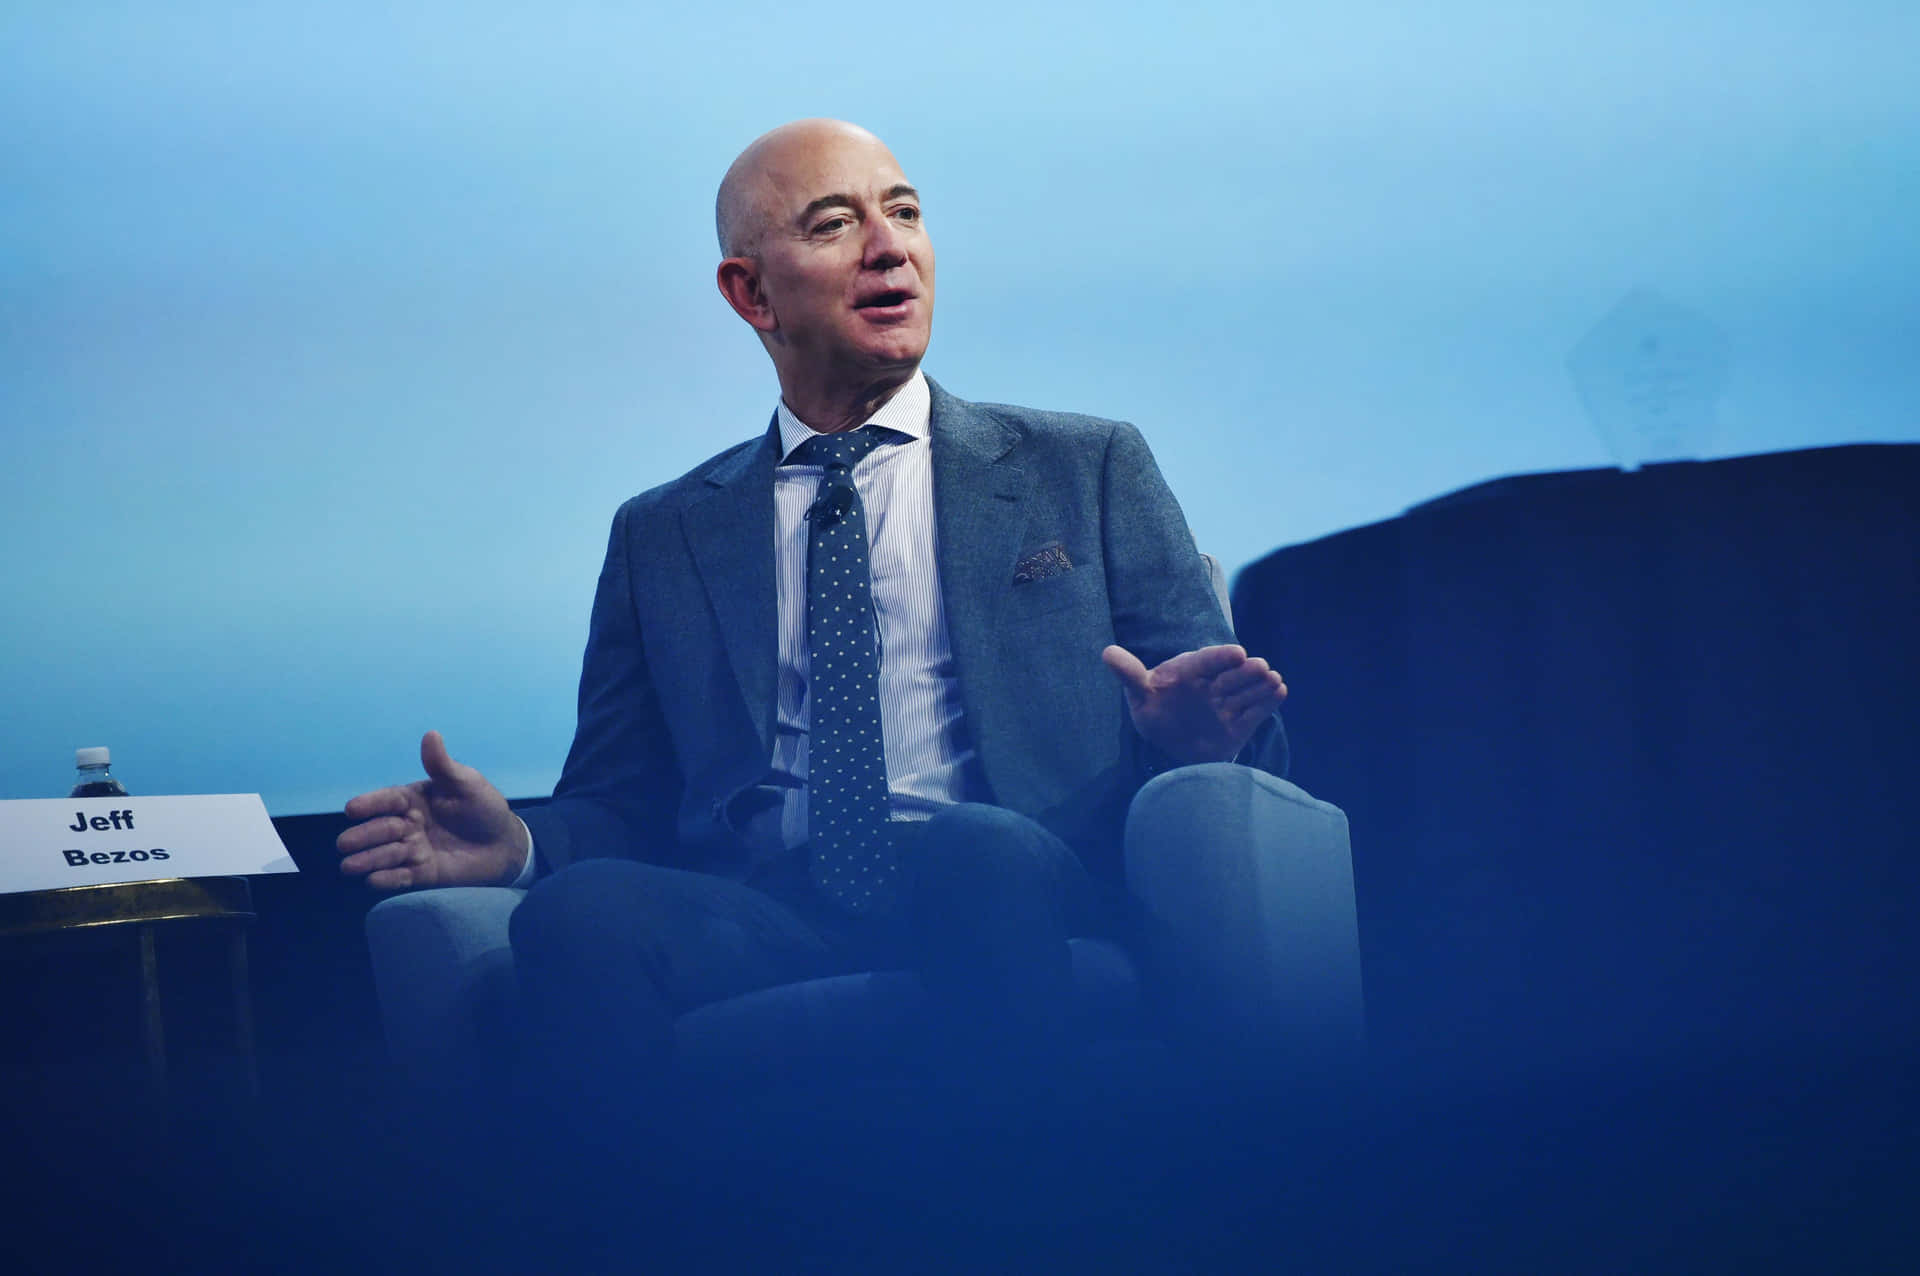 Jeff Bezos Smiling at an Event